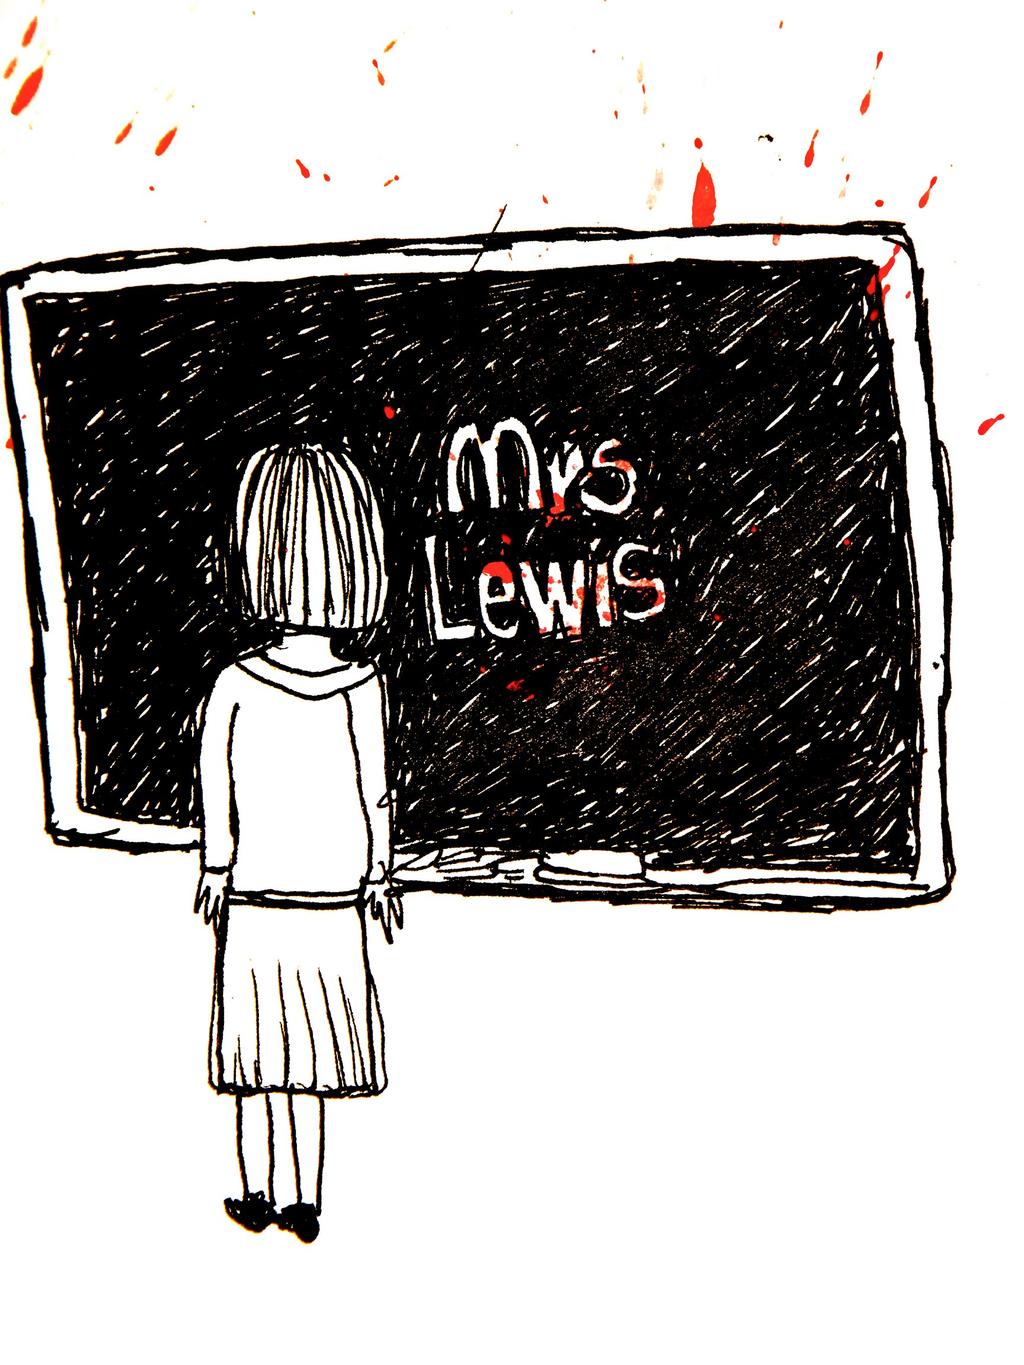 Mrs Lewis by David Mackie The children were fidgety. Shaken-up bottles of coke ready to hiss and blow their tops.